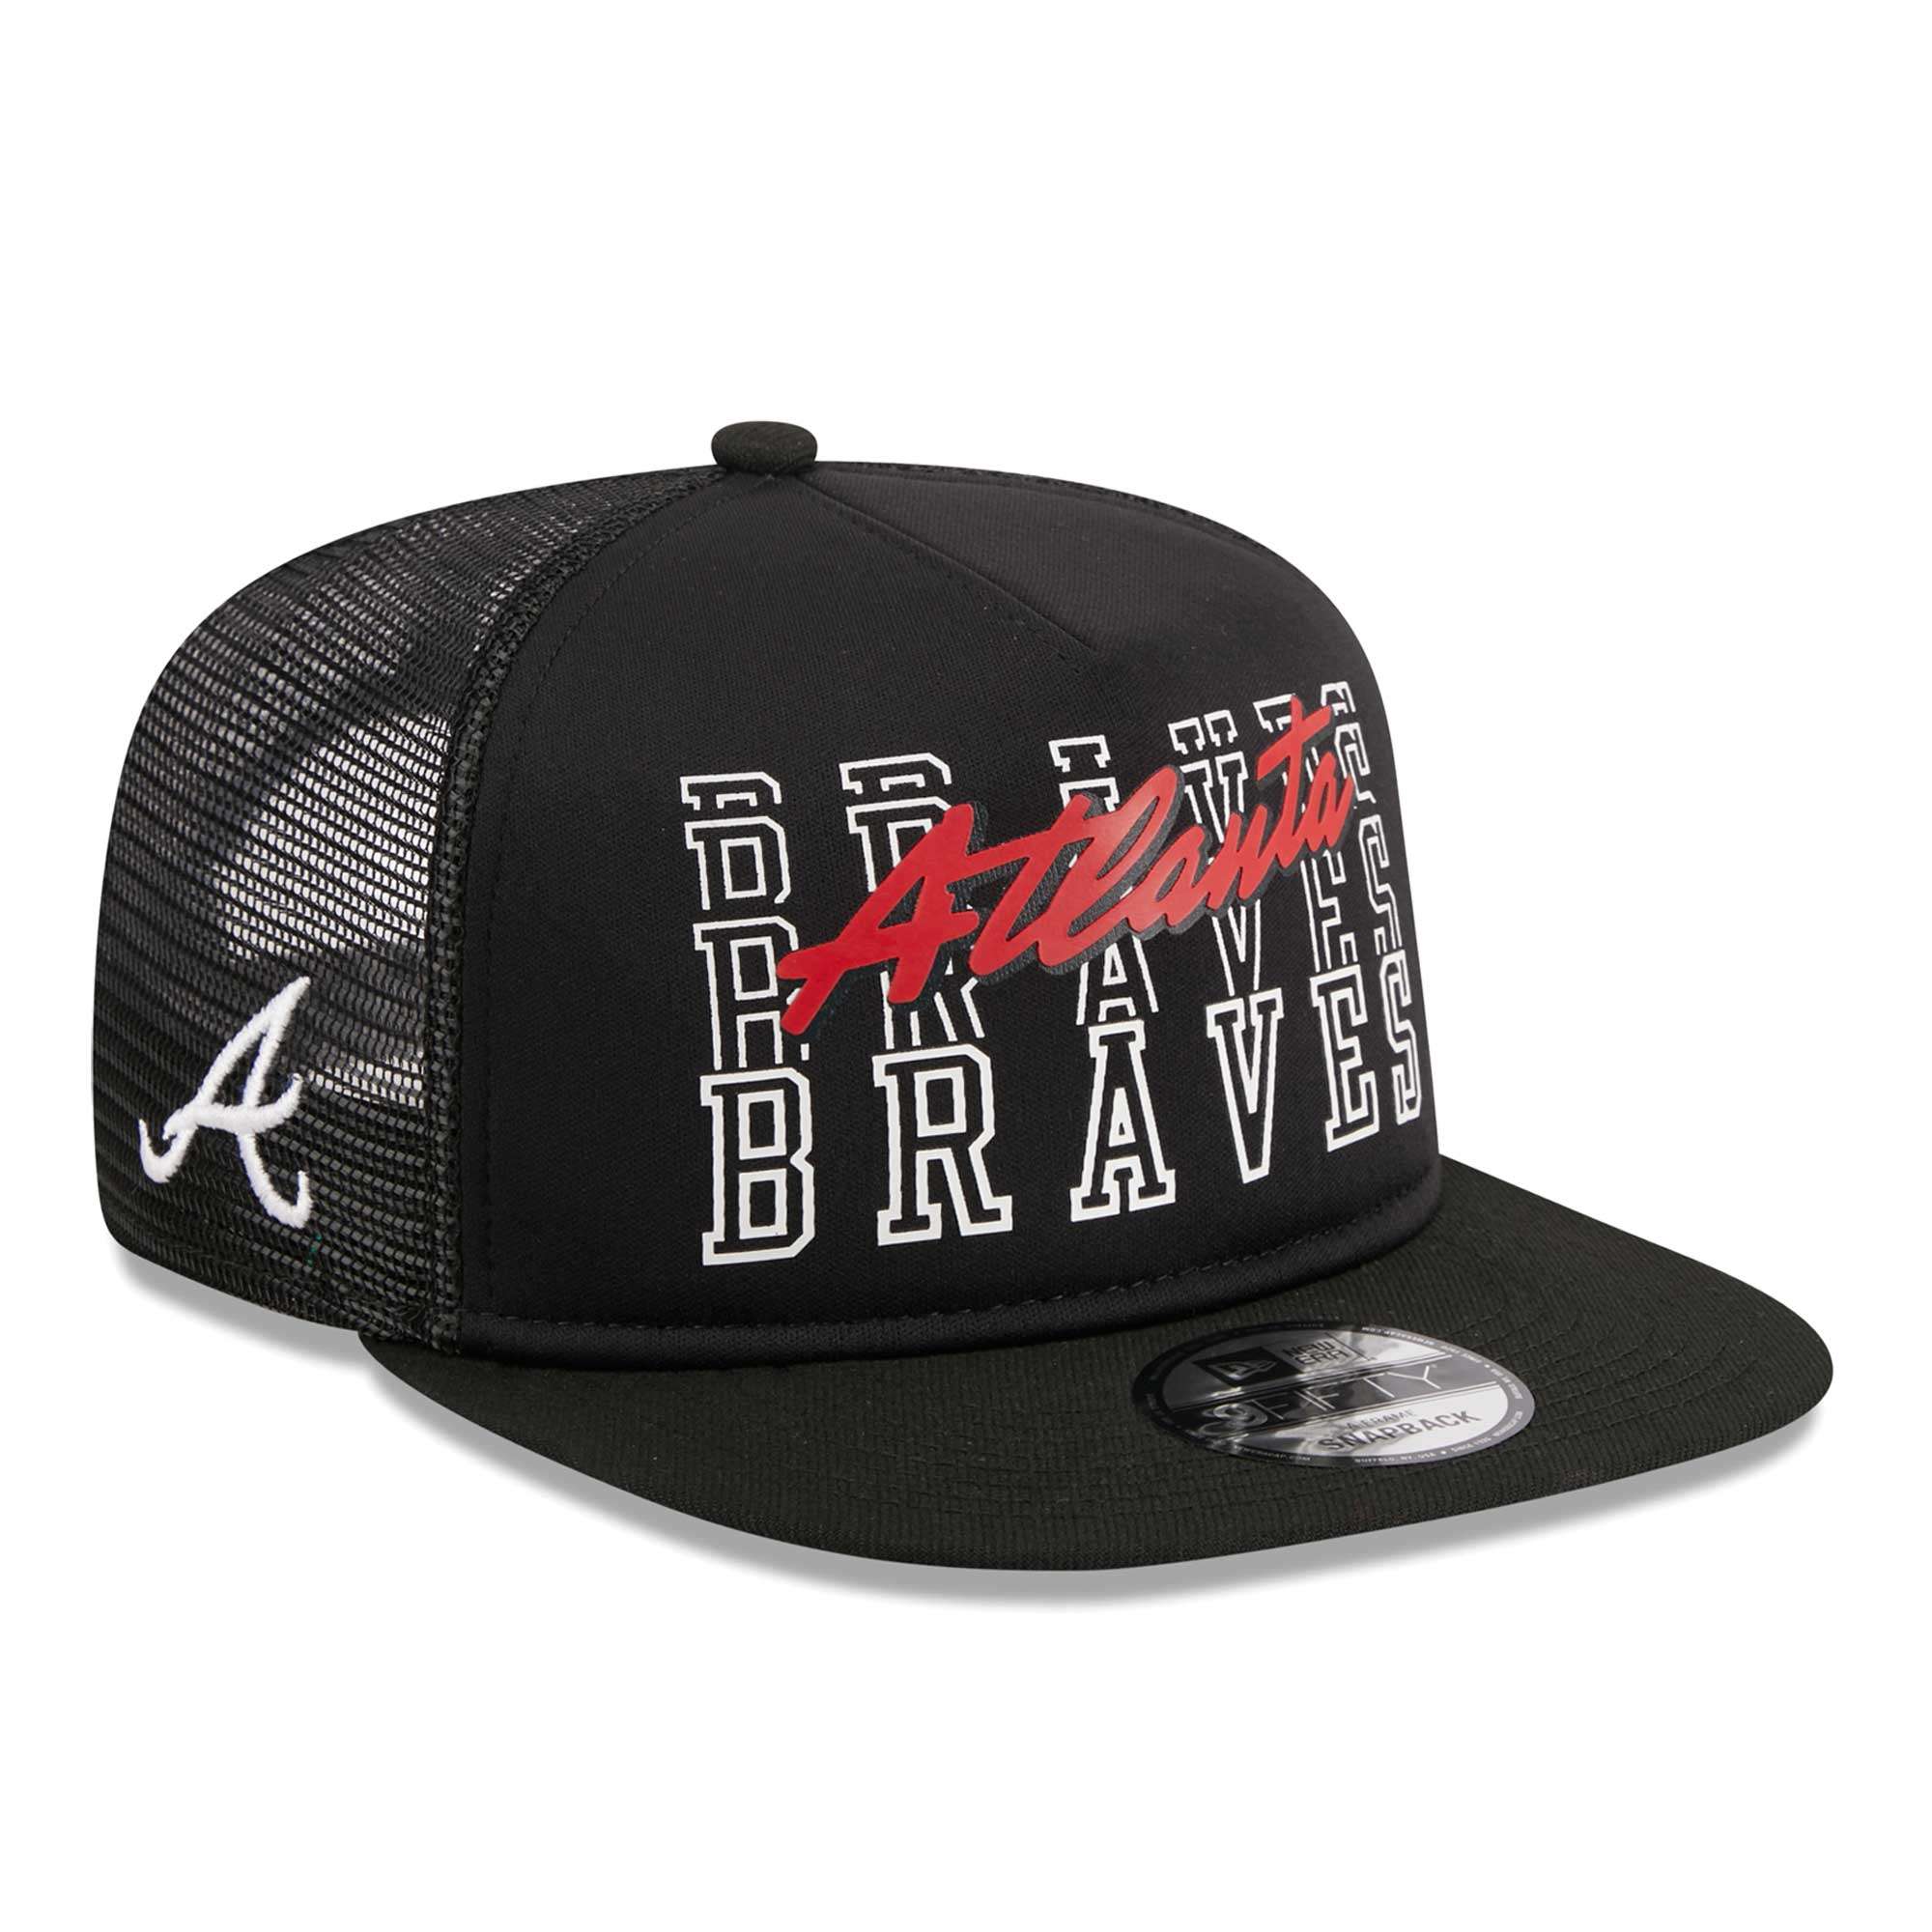 Men's Mitchell & Ness Royal Atlanta Braves Cooperstown Collection Circle Change Trucker Adjustable Hat